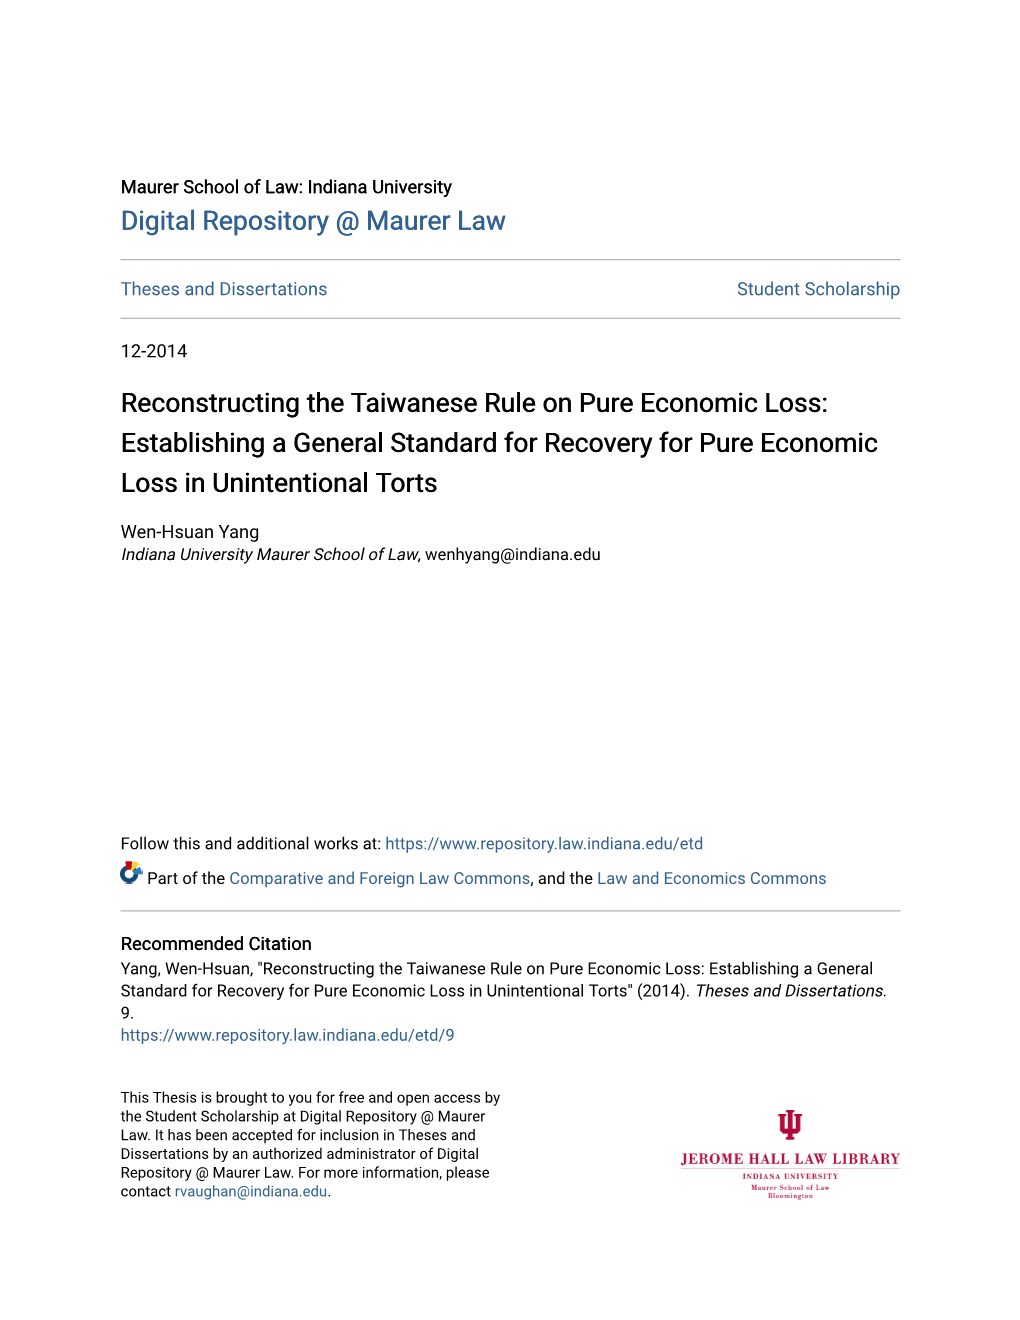 Reconstructing the Taiwanese Rule on Pure Economic Loss: Establishing a General Standard for Recovery for Pure Economic Loss in Unintentional Torts